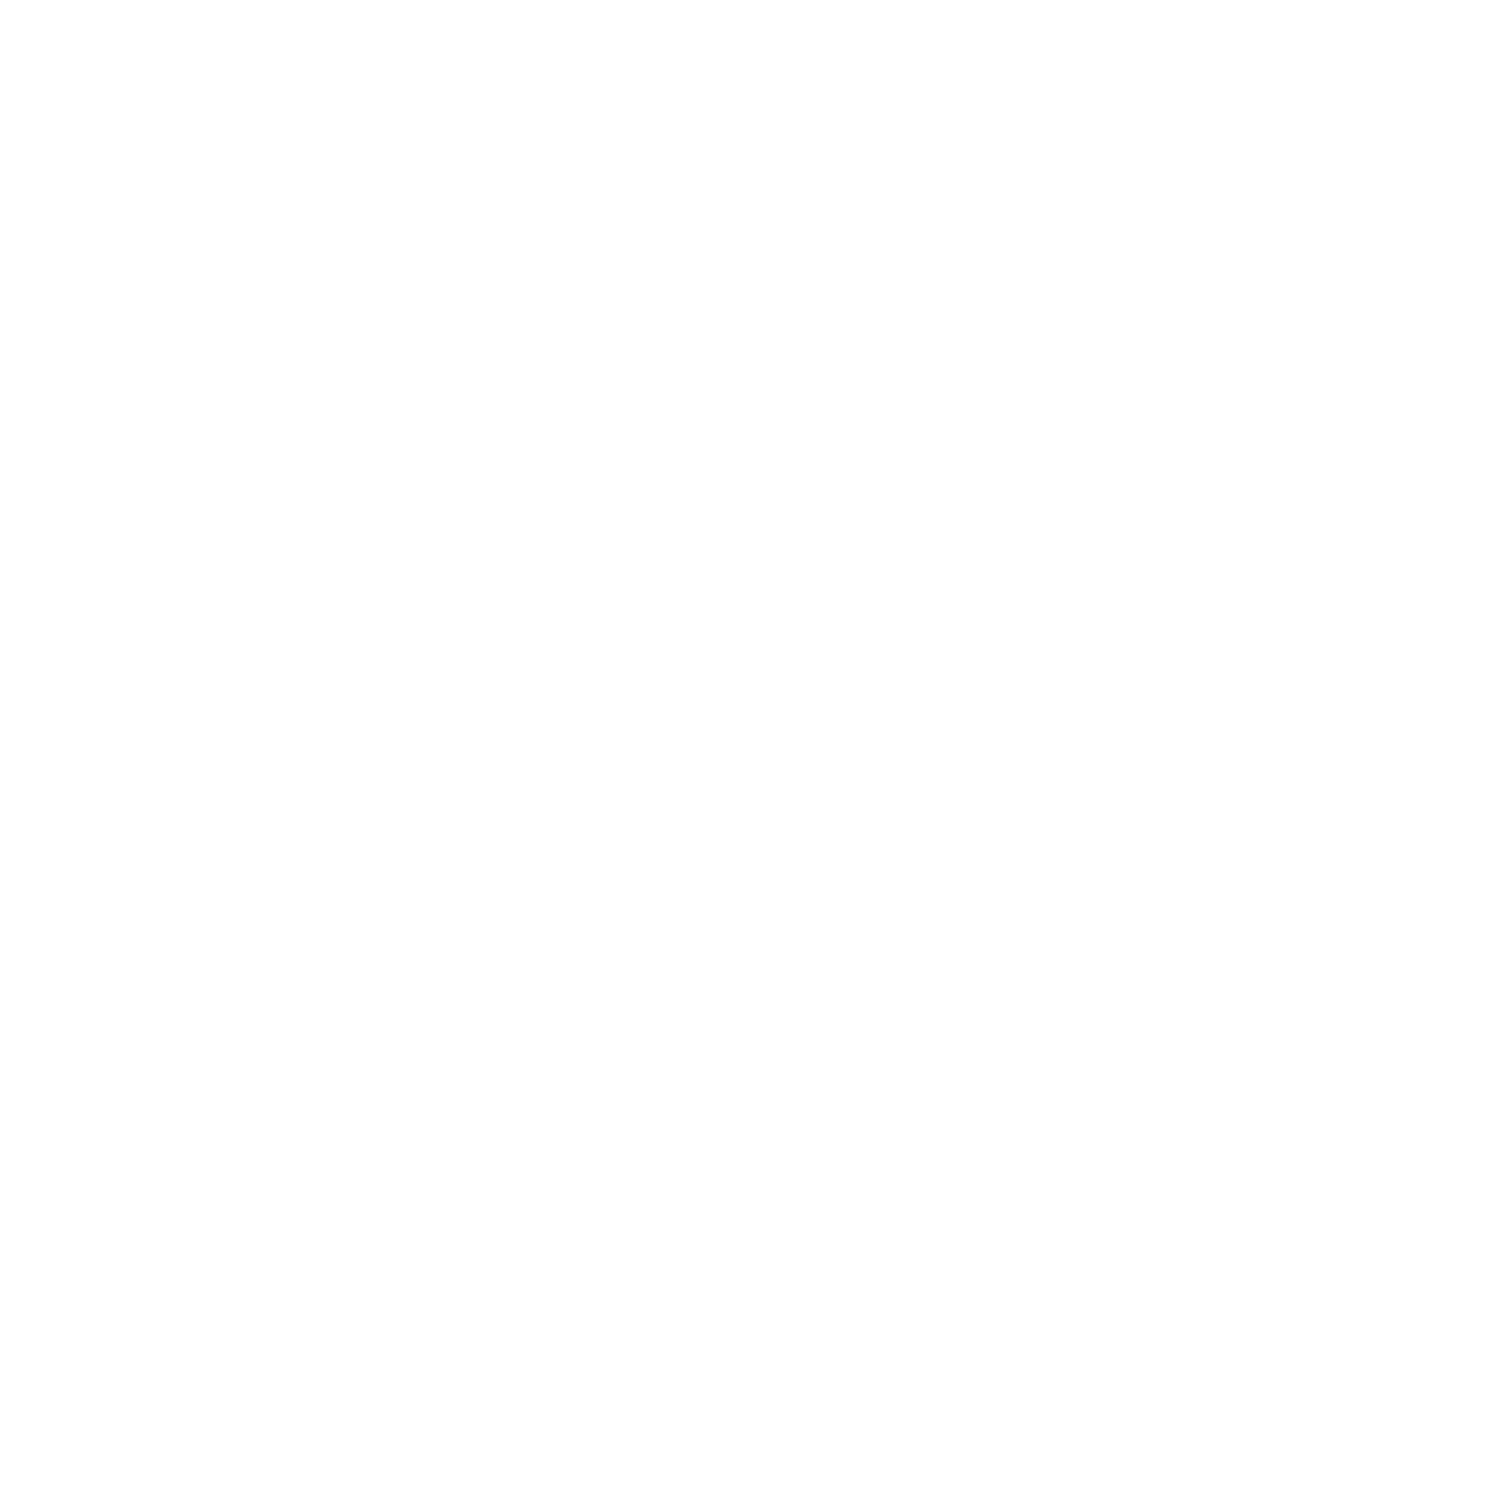 The Bellview